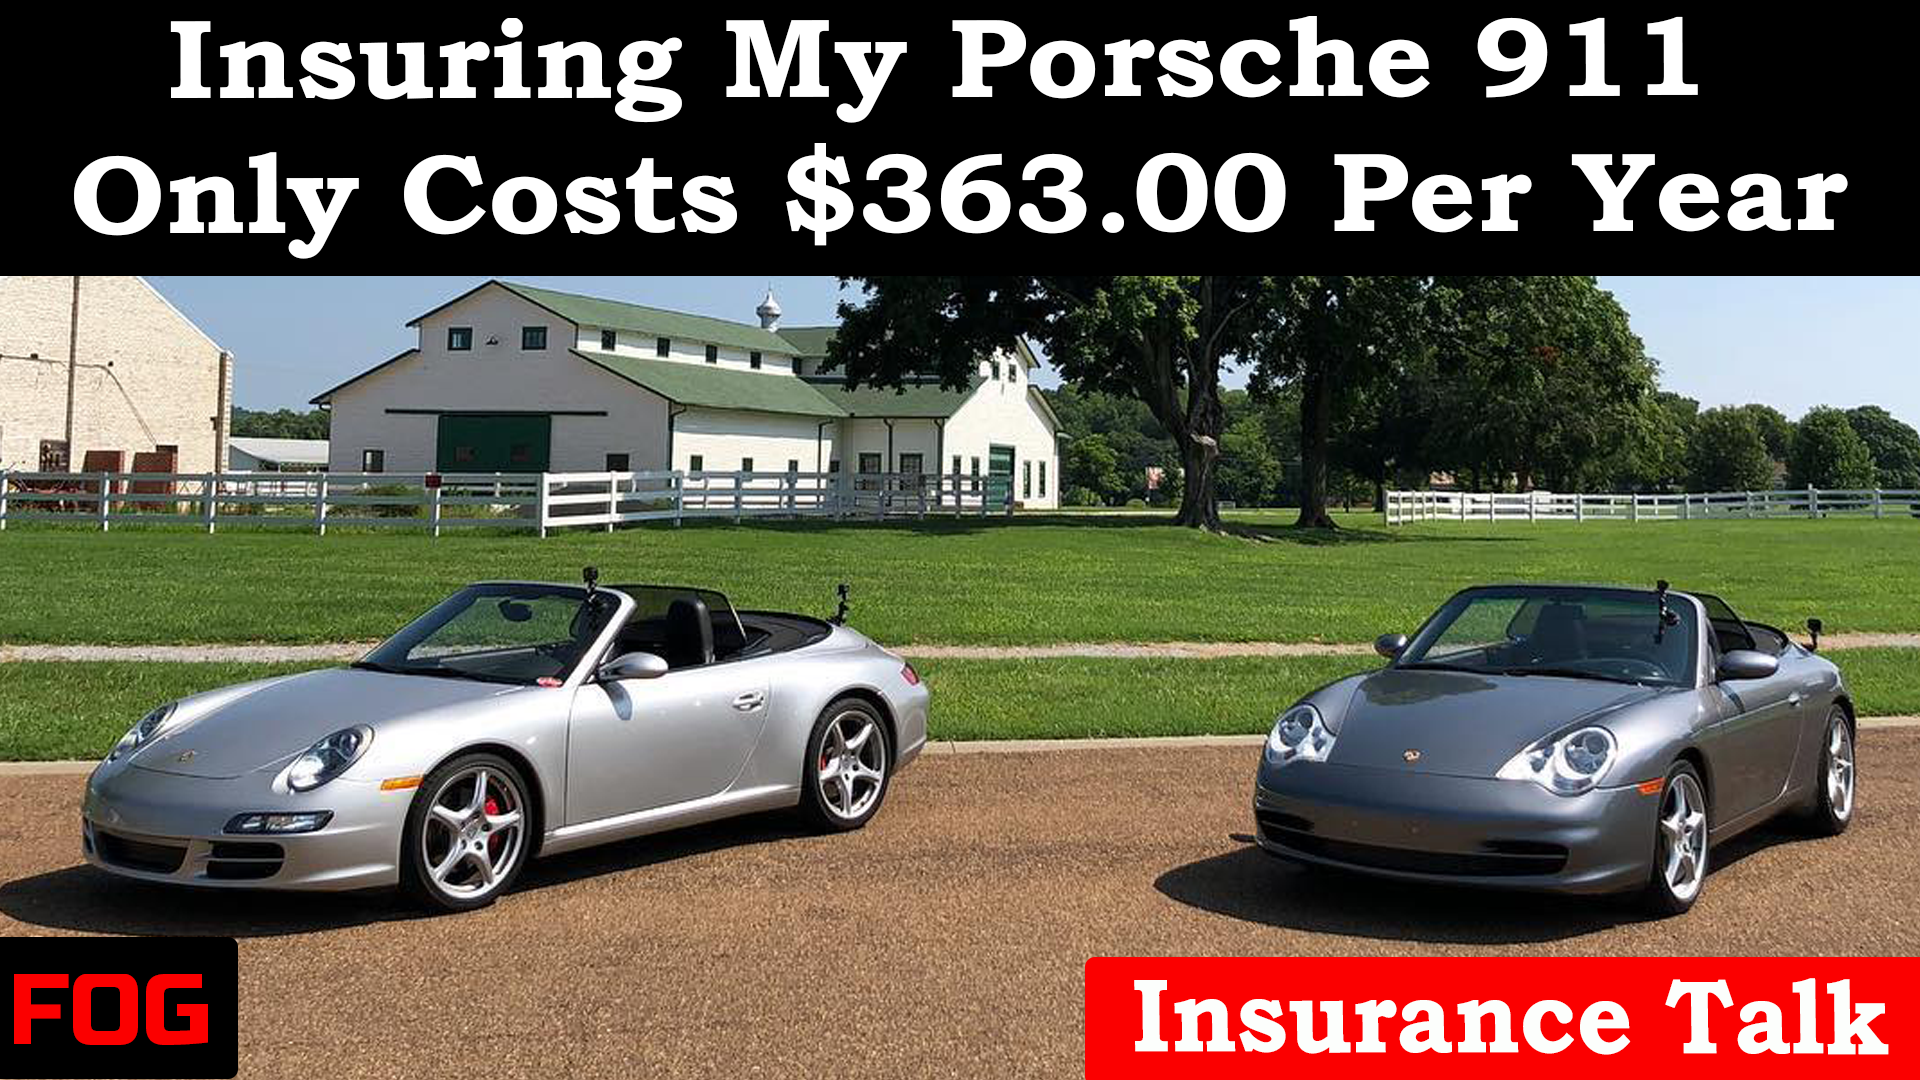 How much does it cost to insure a porsche 911